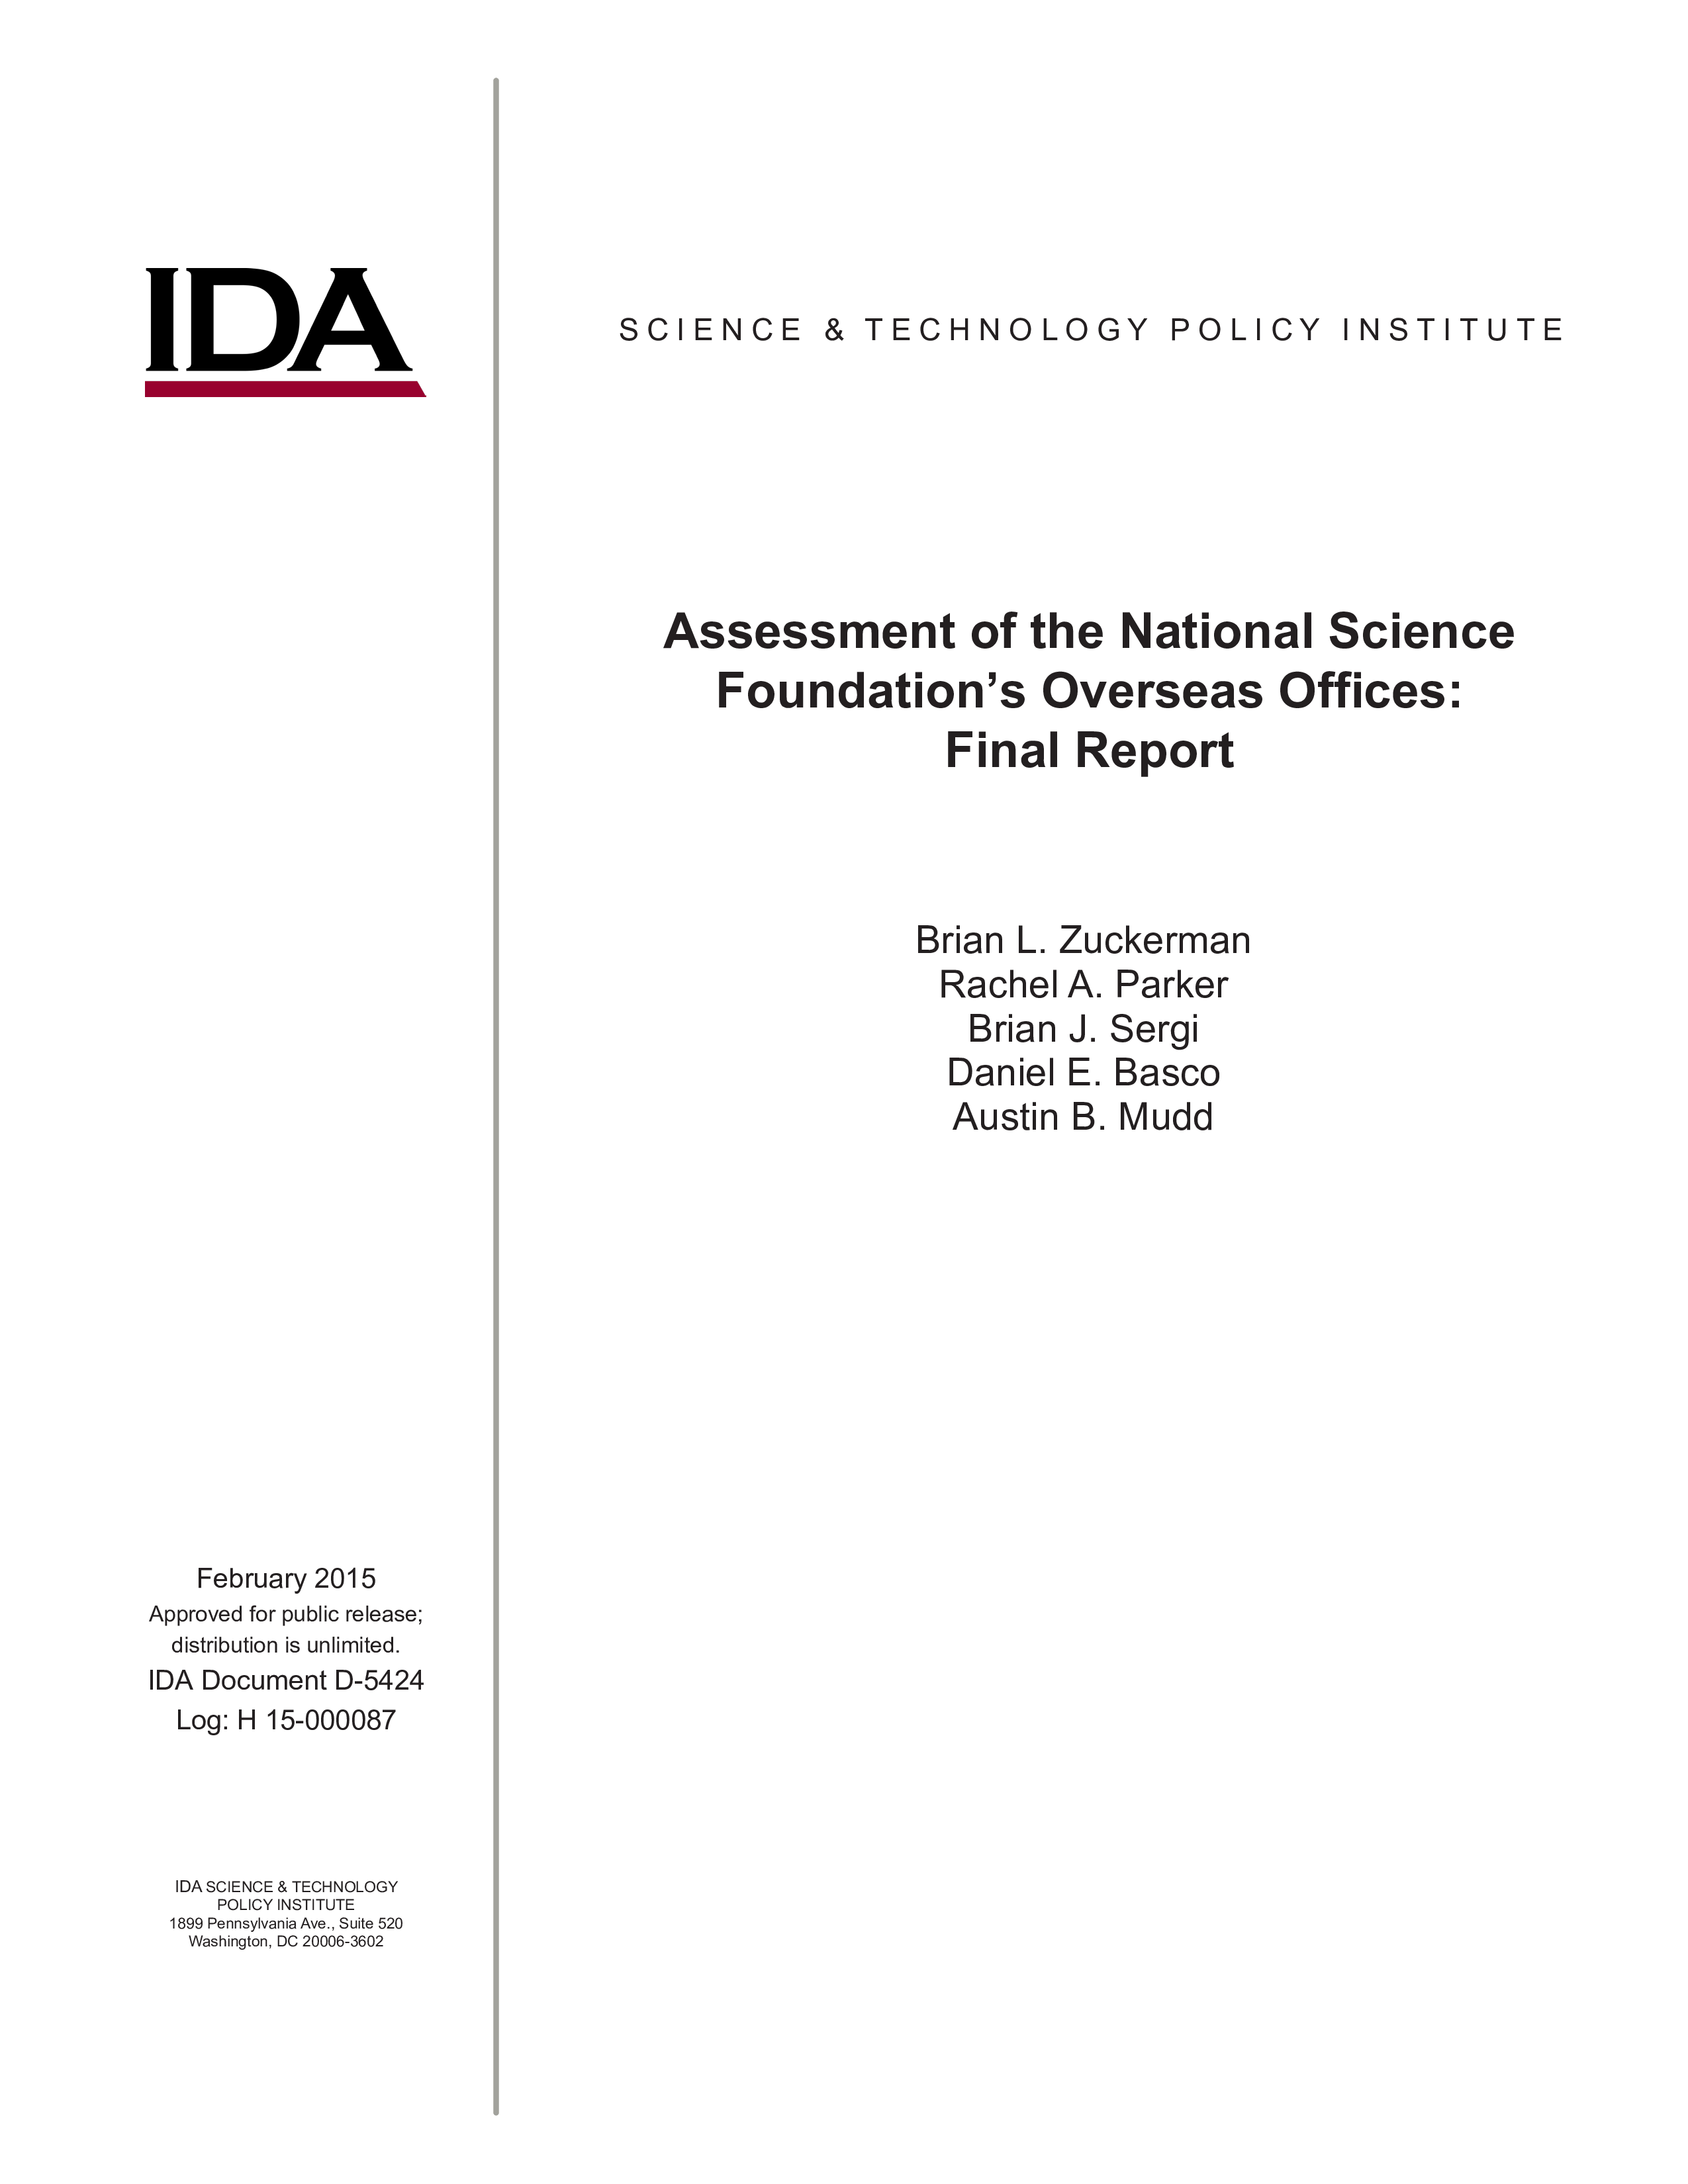 Assessment of the National Science Foundation’s Overseas Offices: Final Report